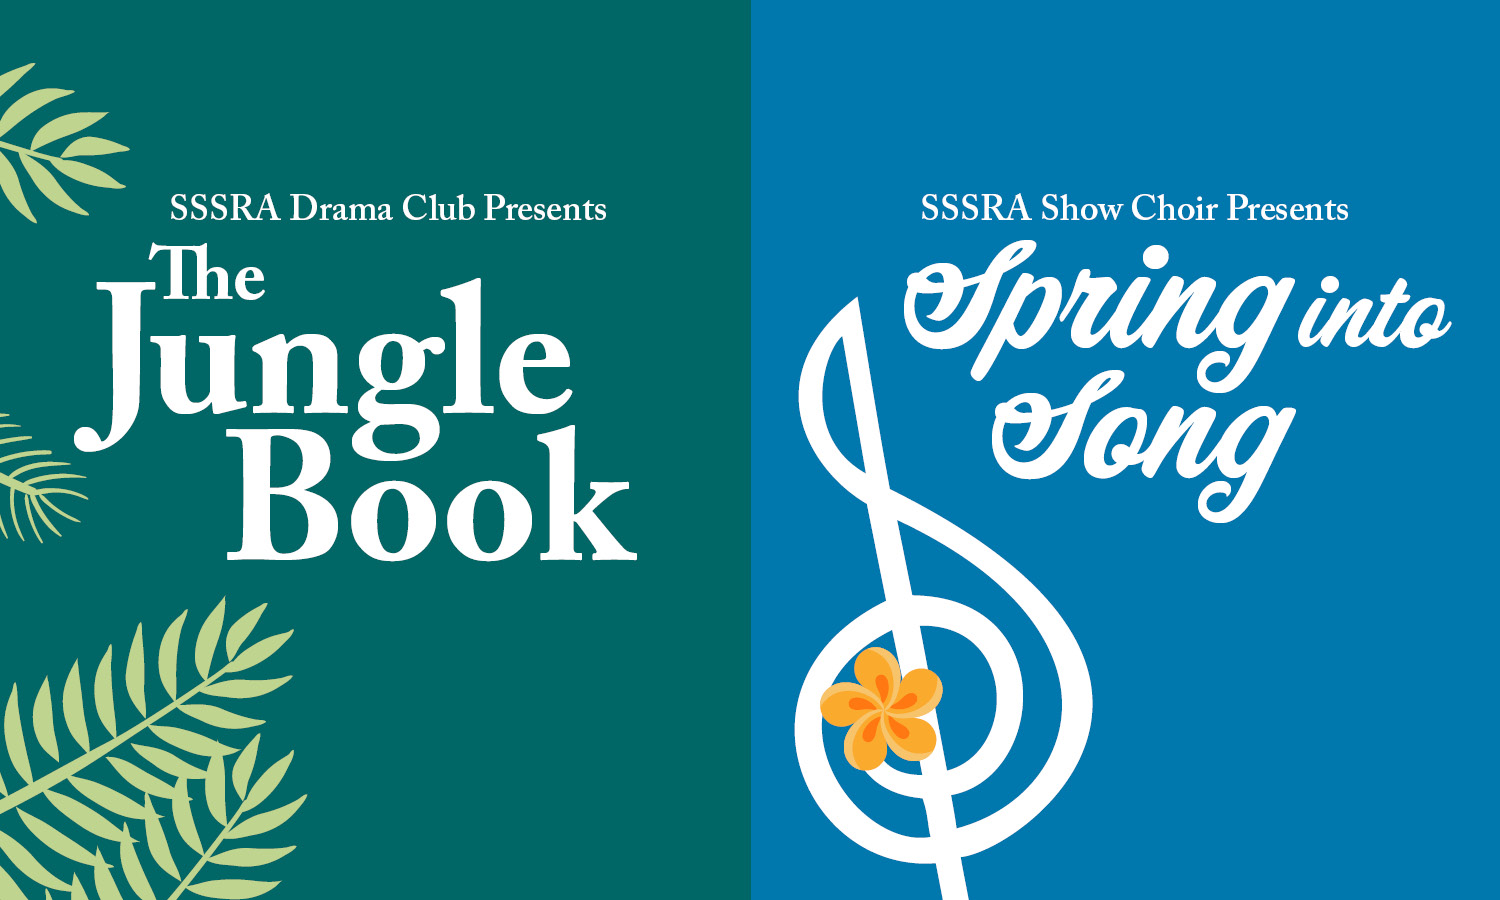 Illustration of jungle leaves. Text: SSSRA Drama Club presents The Jungle Book. Illustration of music note with flower. Text: SSSRA Show Choir presents Spring Into Song